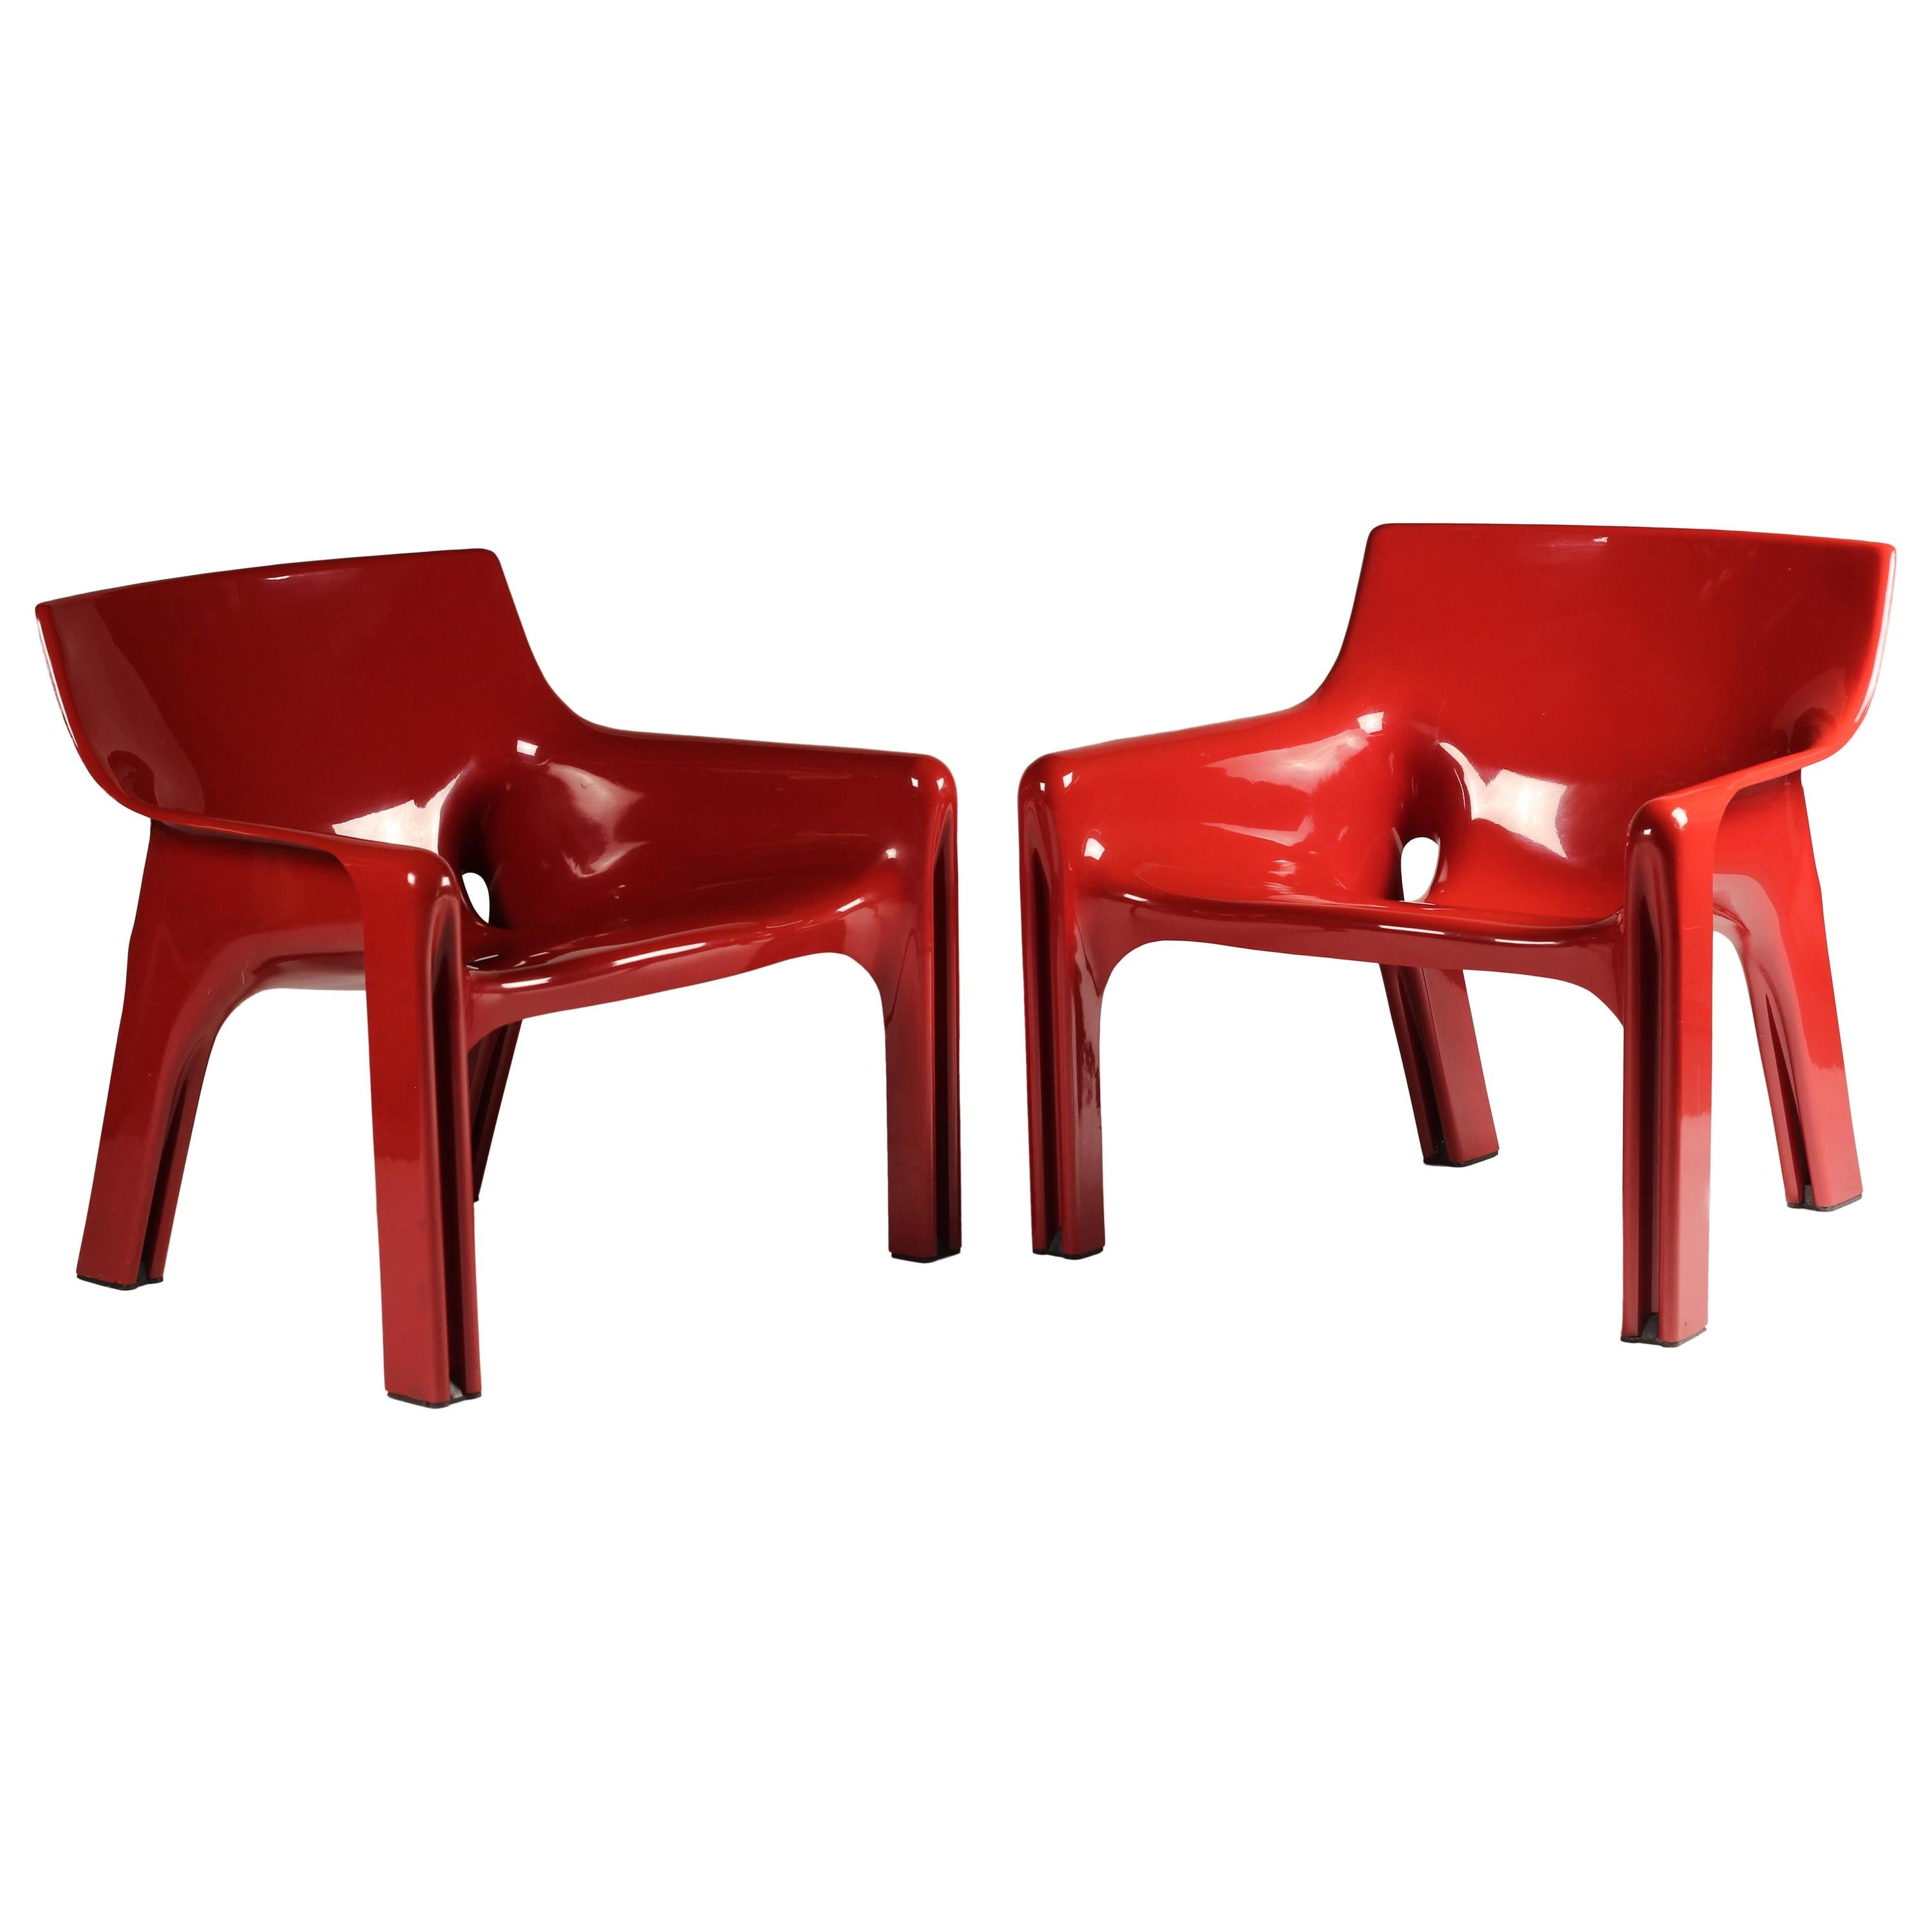 Pair of Red Vicario Lounge Chairs Design by Vico Magistretti Made by Artemide